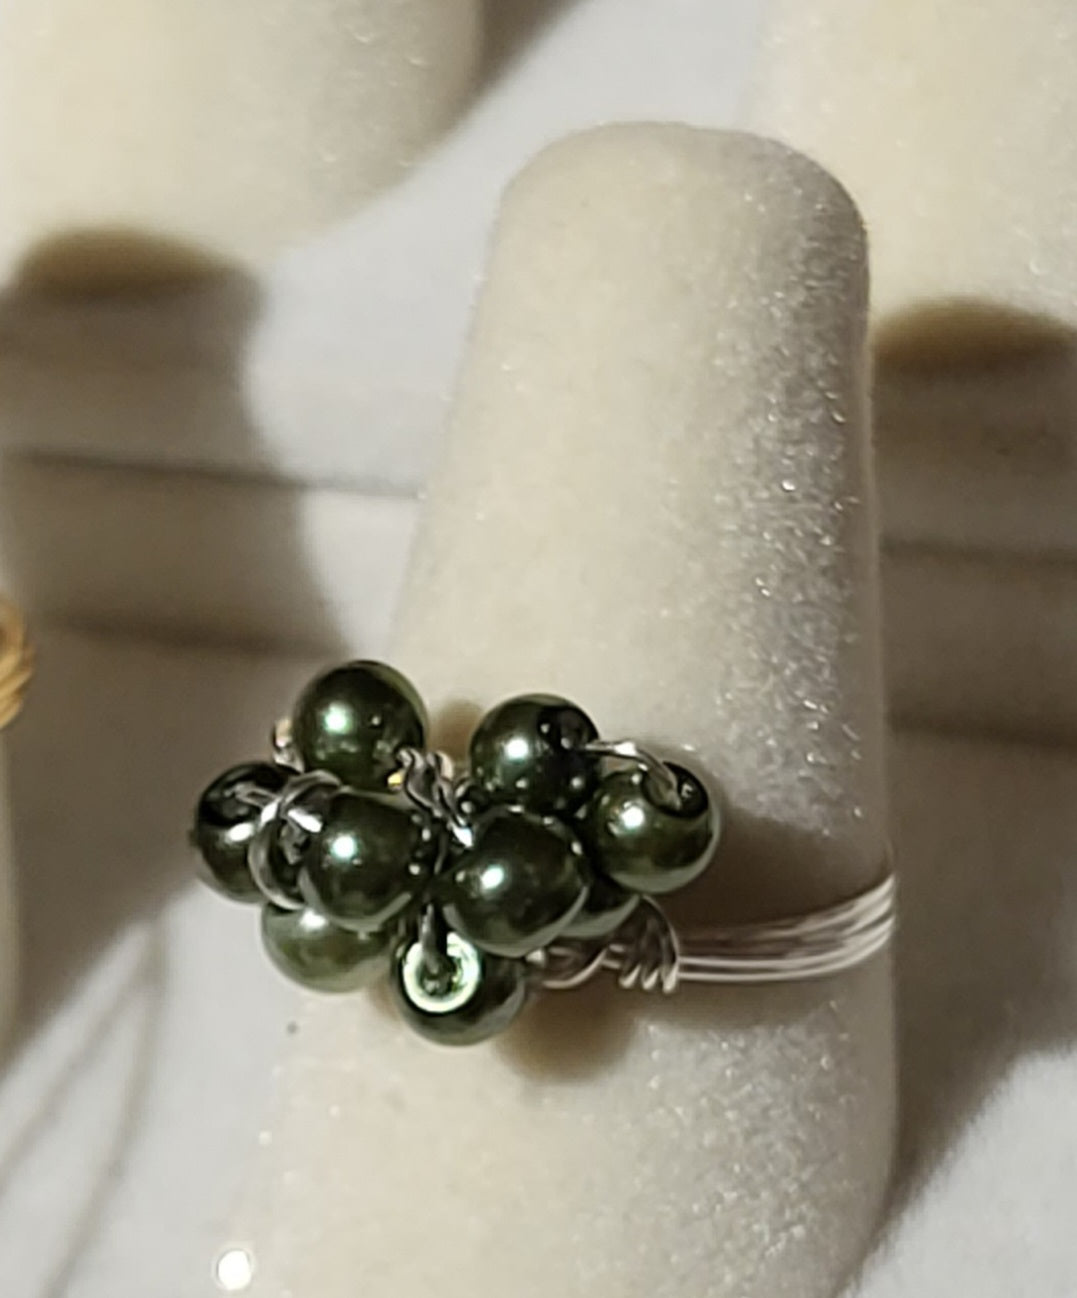 Tiny Hunter Green Pearl Cluster Ring. Silver tone. Size 7.5